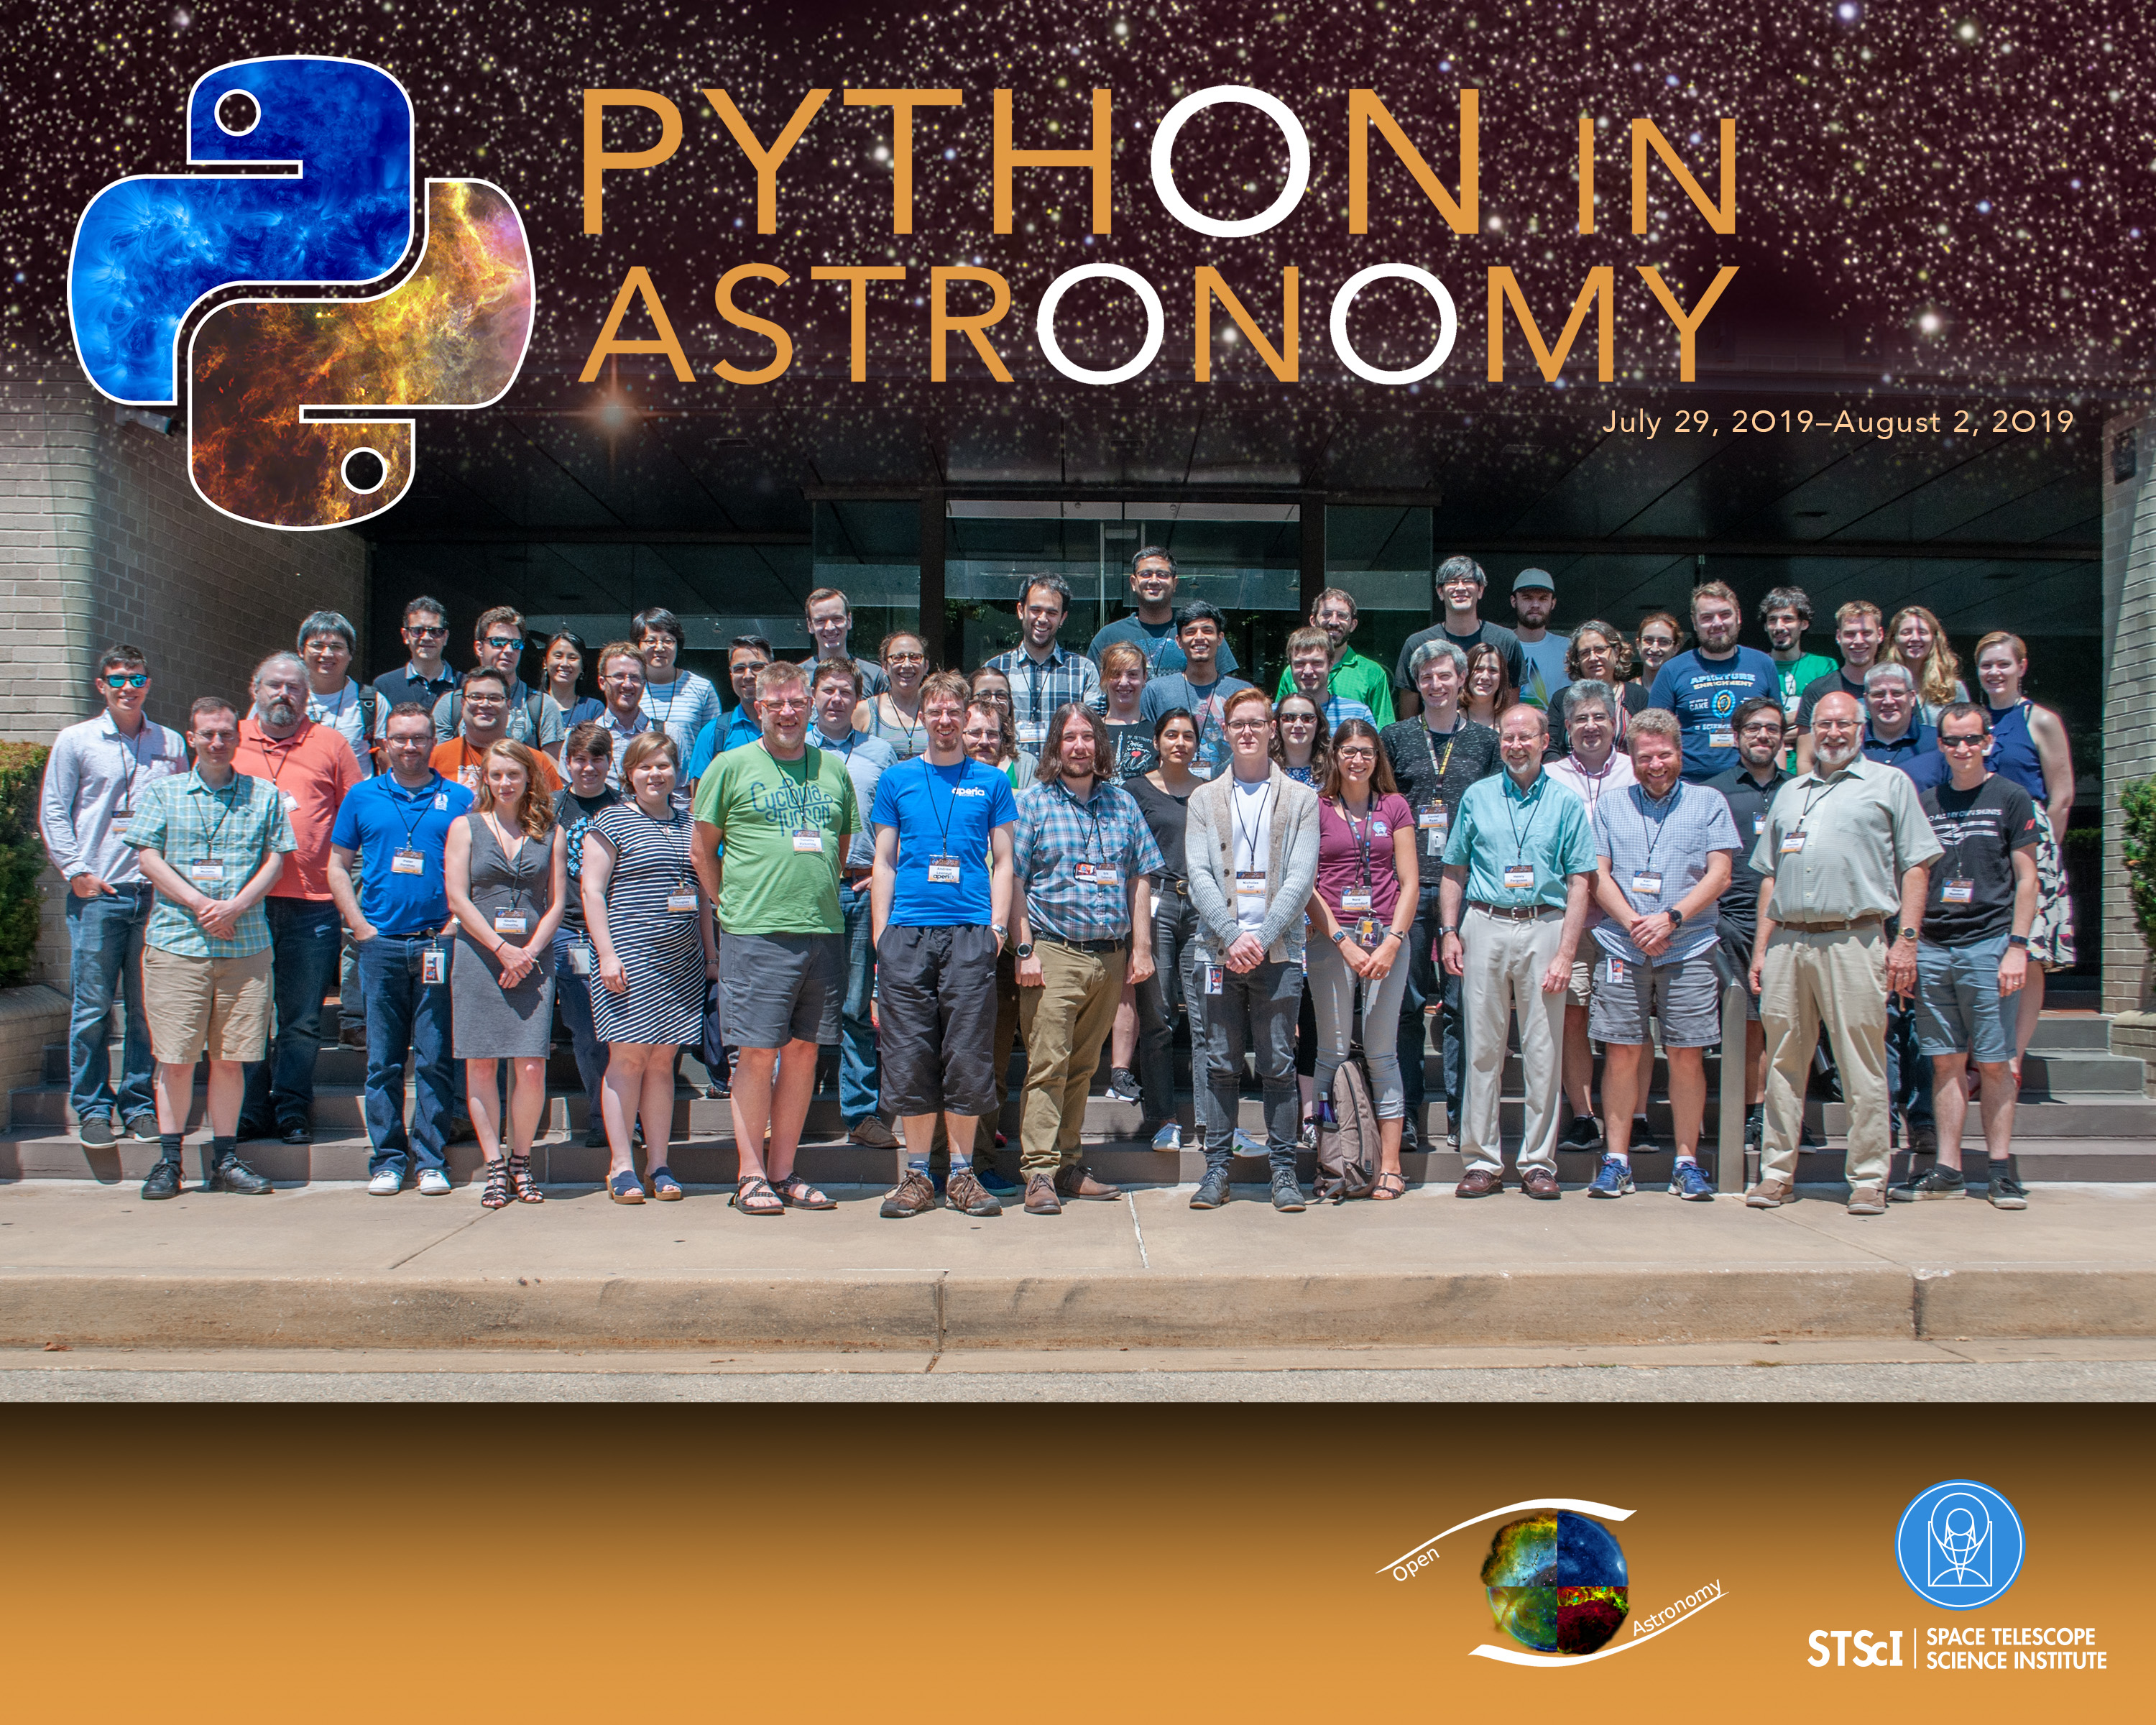 Python in Astronomy 2019 Attendees, Copyright 2019 Pam Jeffries